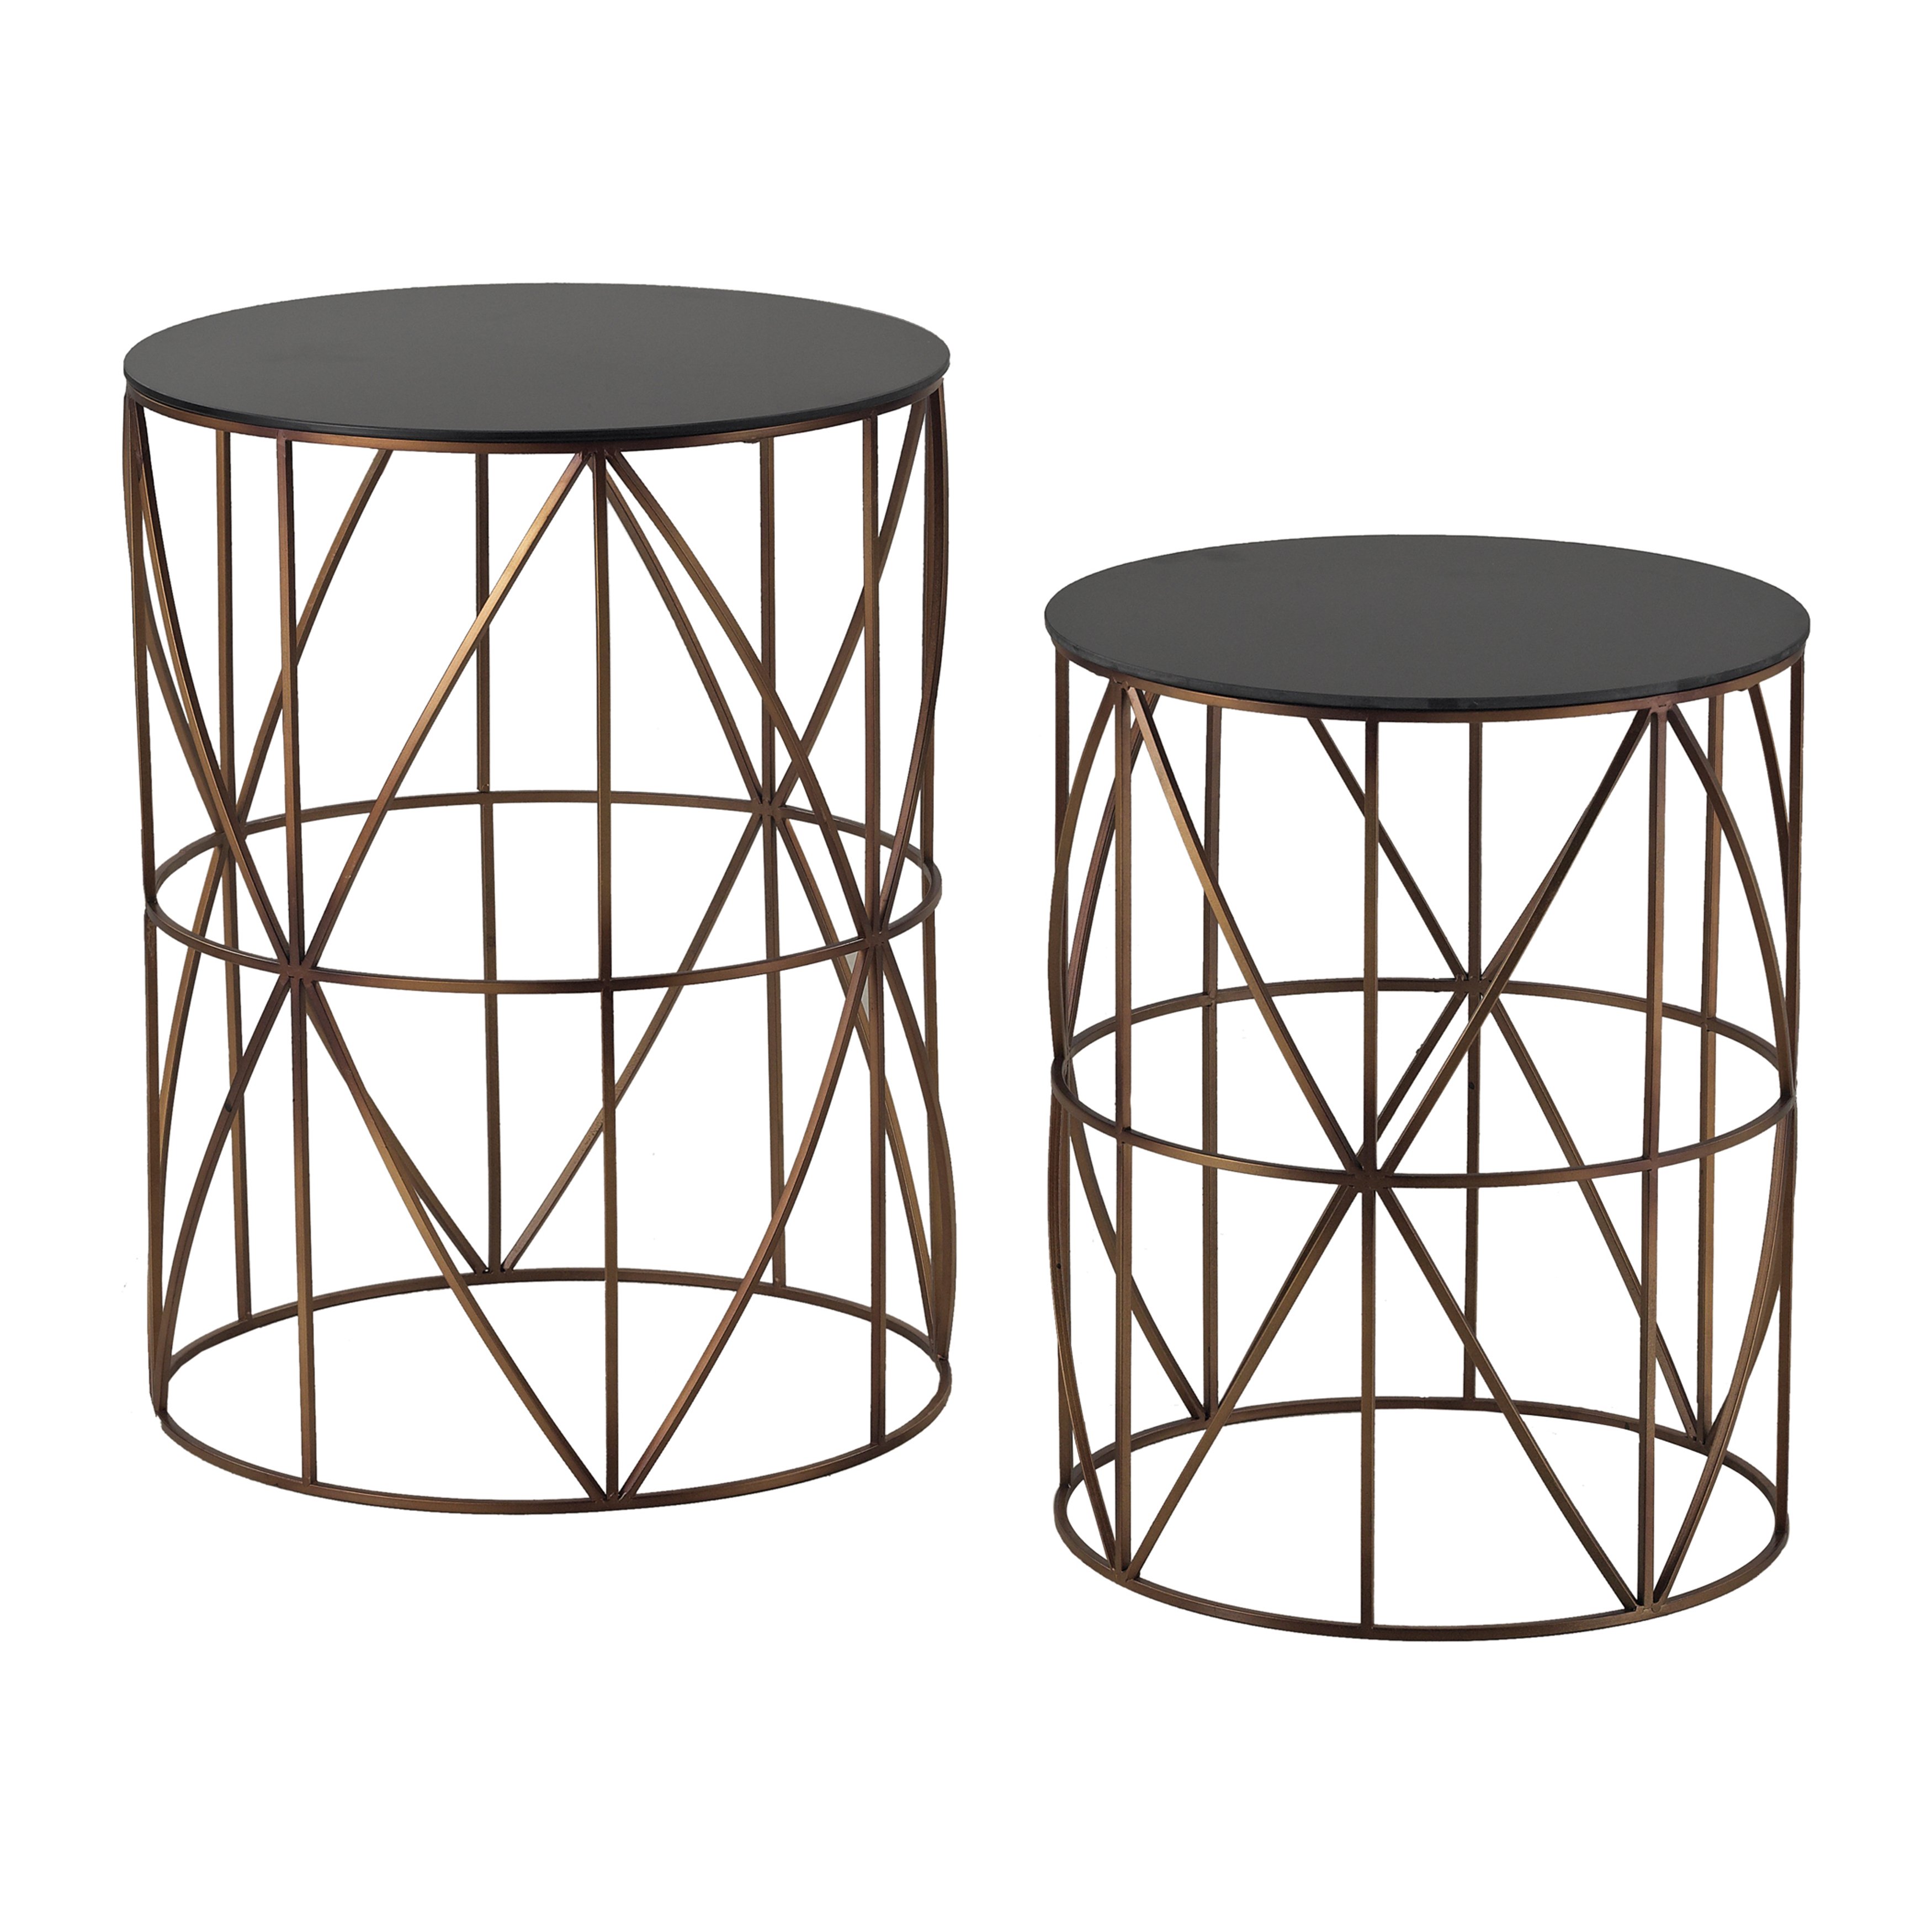 set two gold finish round metal accent tables free table shipping today lucite stacking ultra modern lamps legs black and glass side teal storage cabinet nate berkus new home